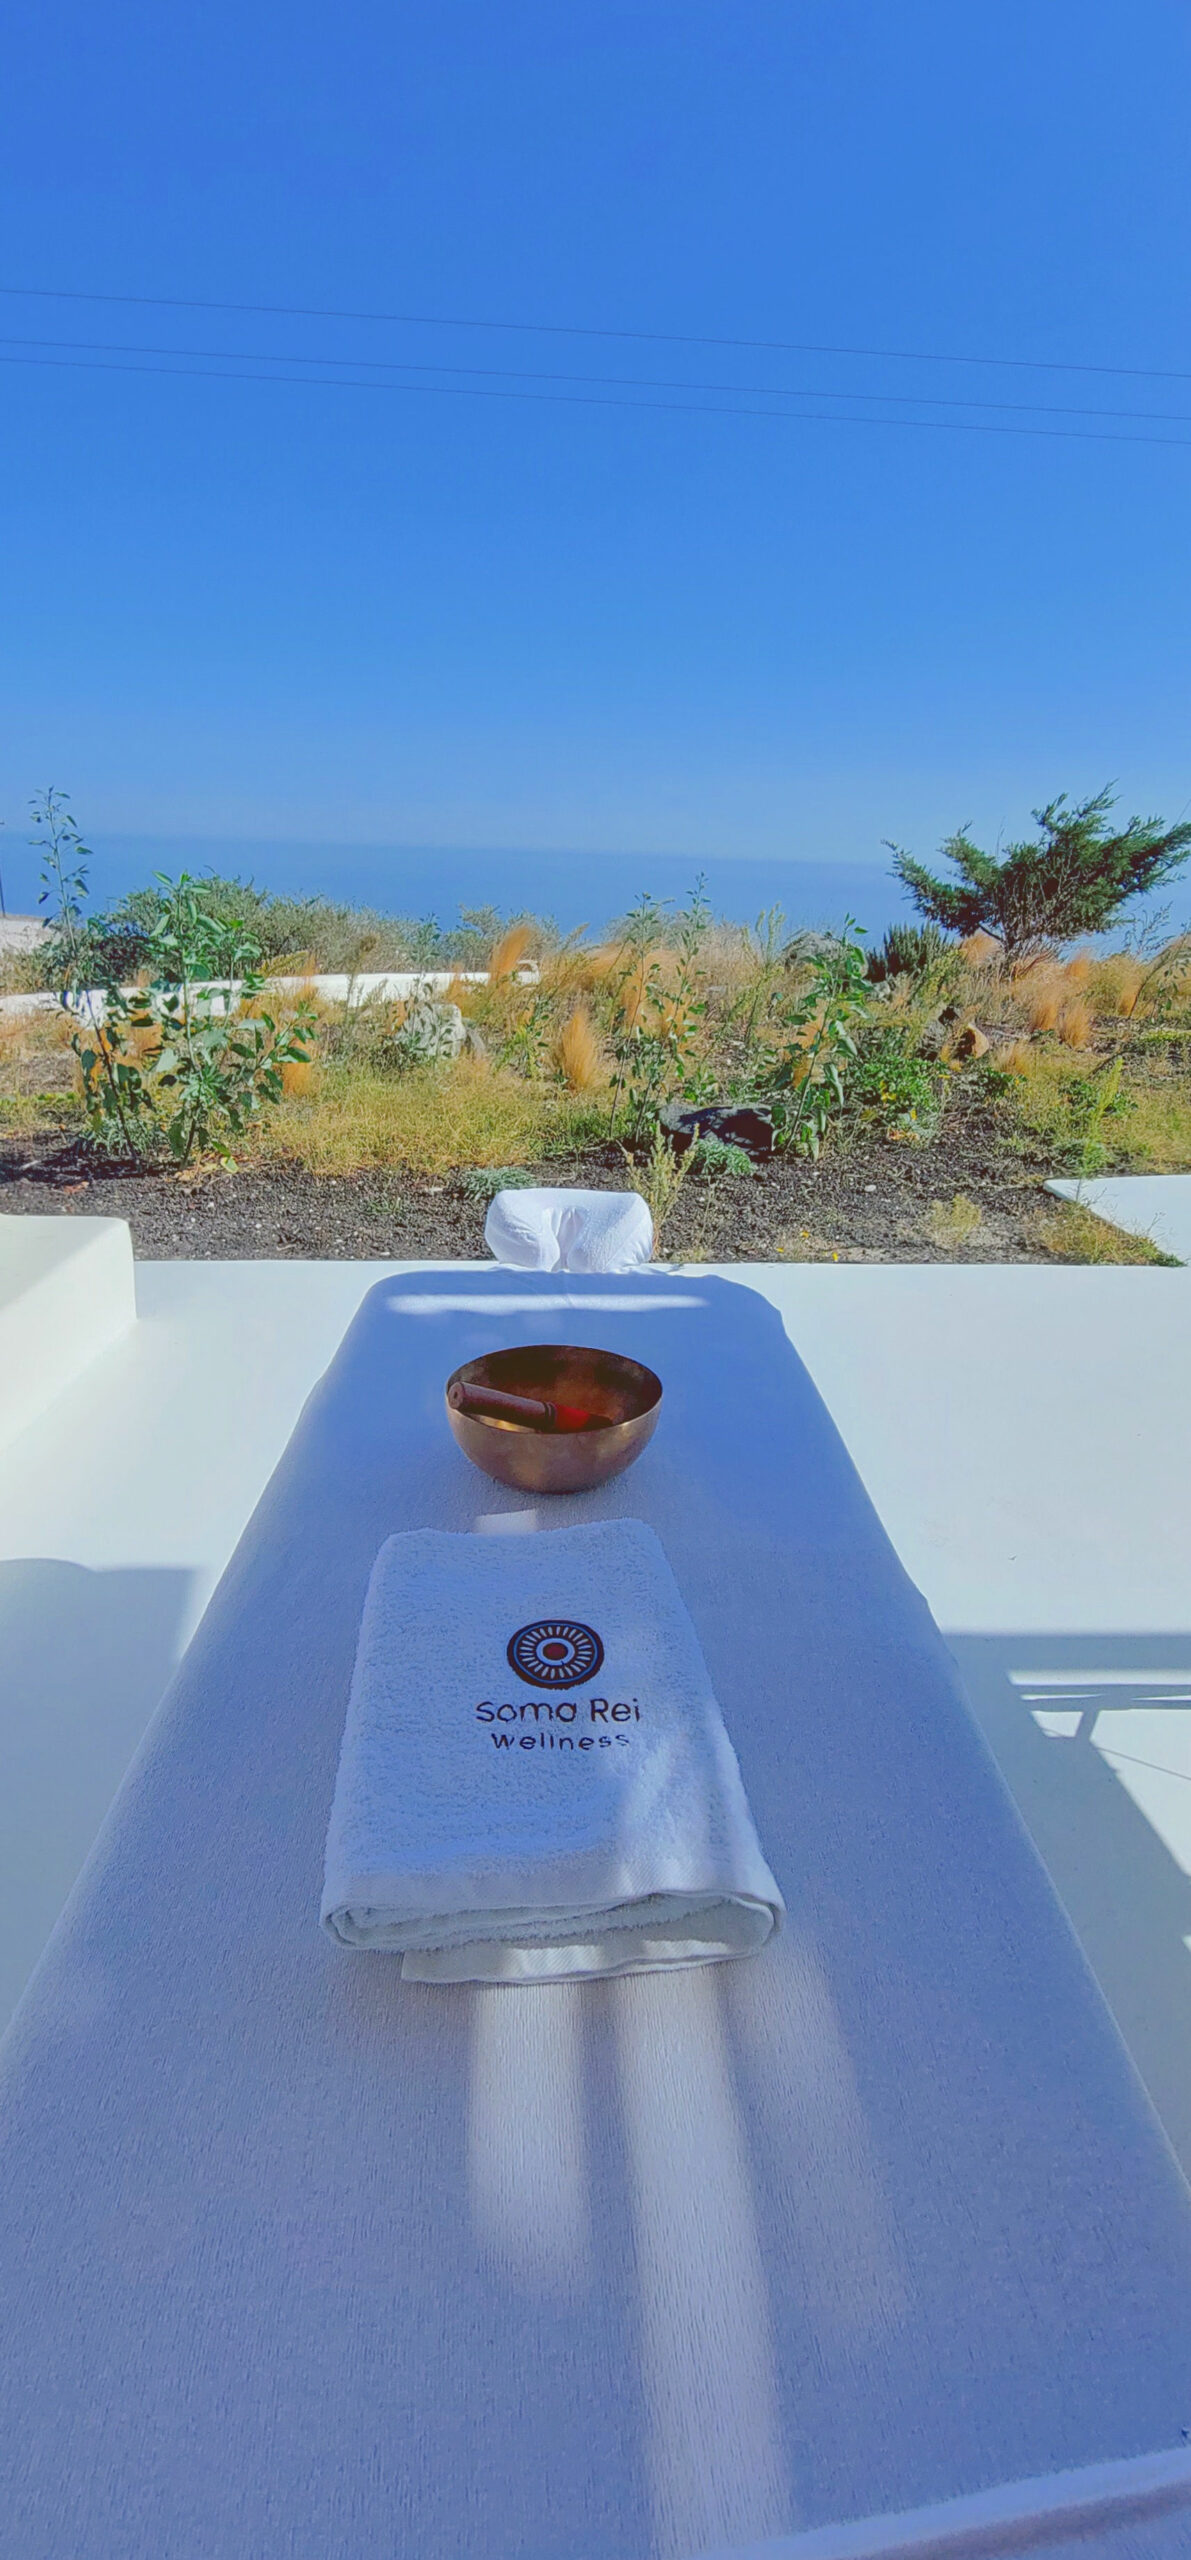 Santorini Sound Healing, Reiki, and Massage: The perfect combination with Soma Rei Wellness